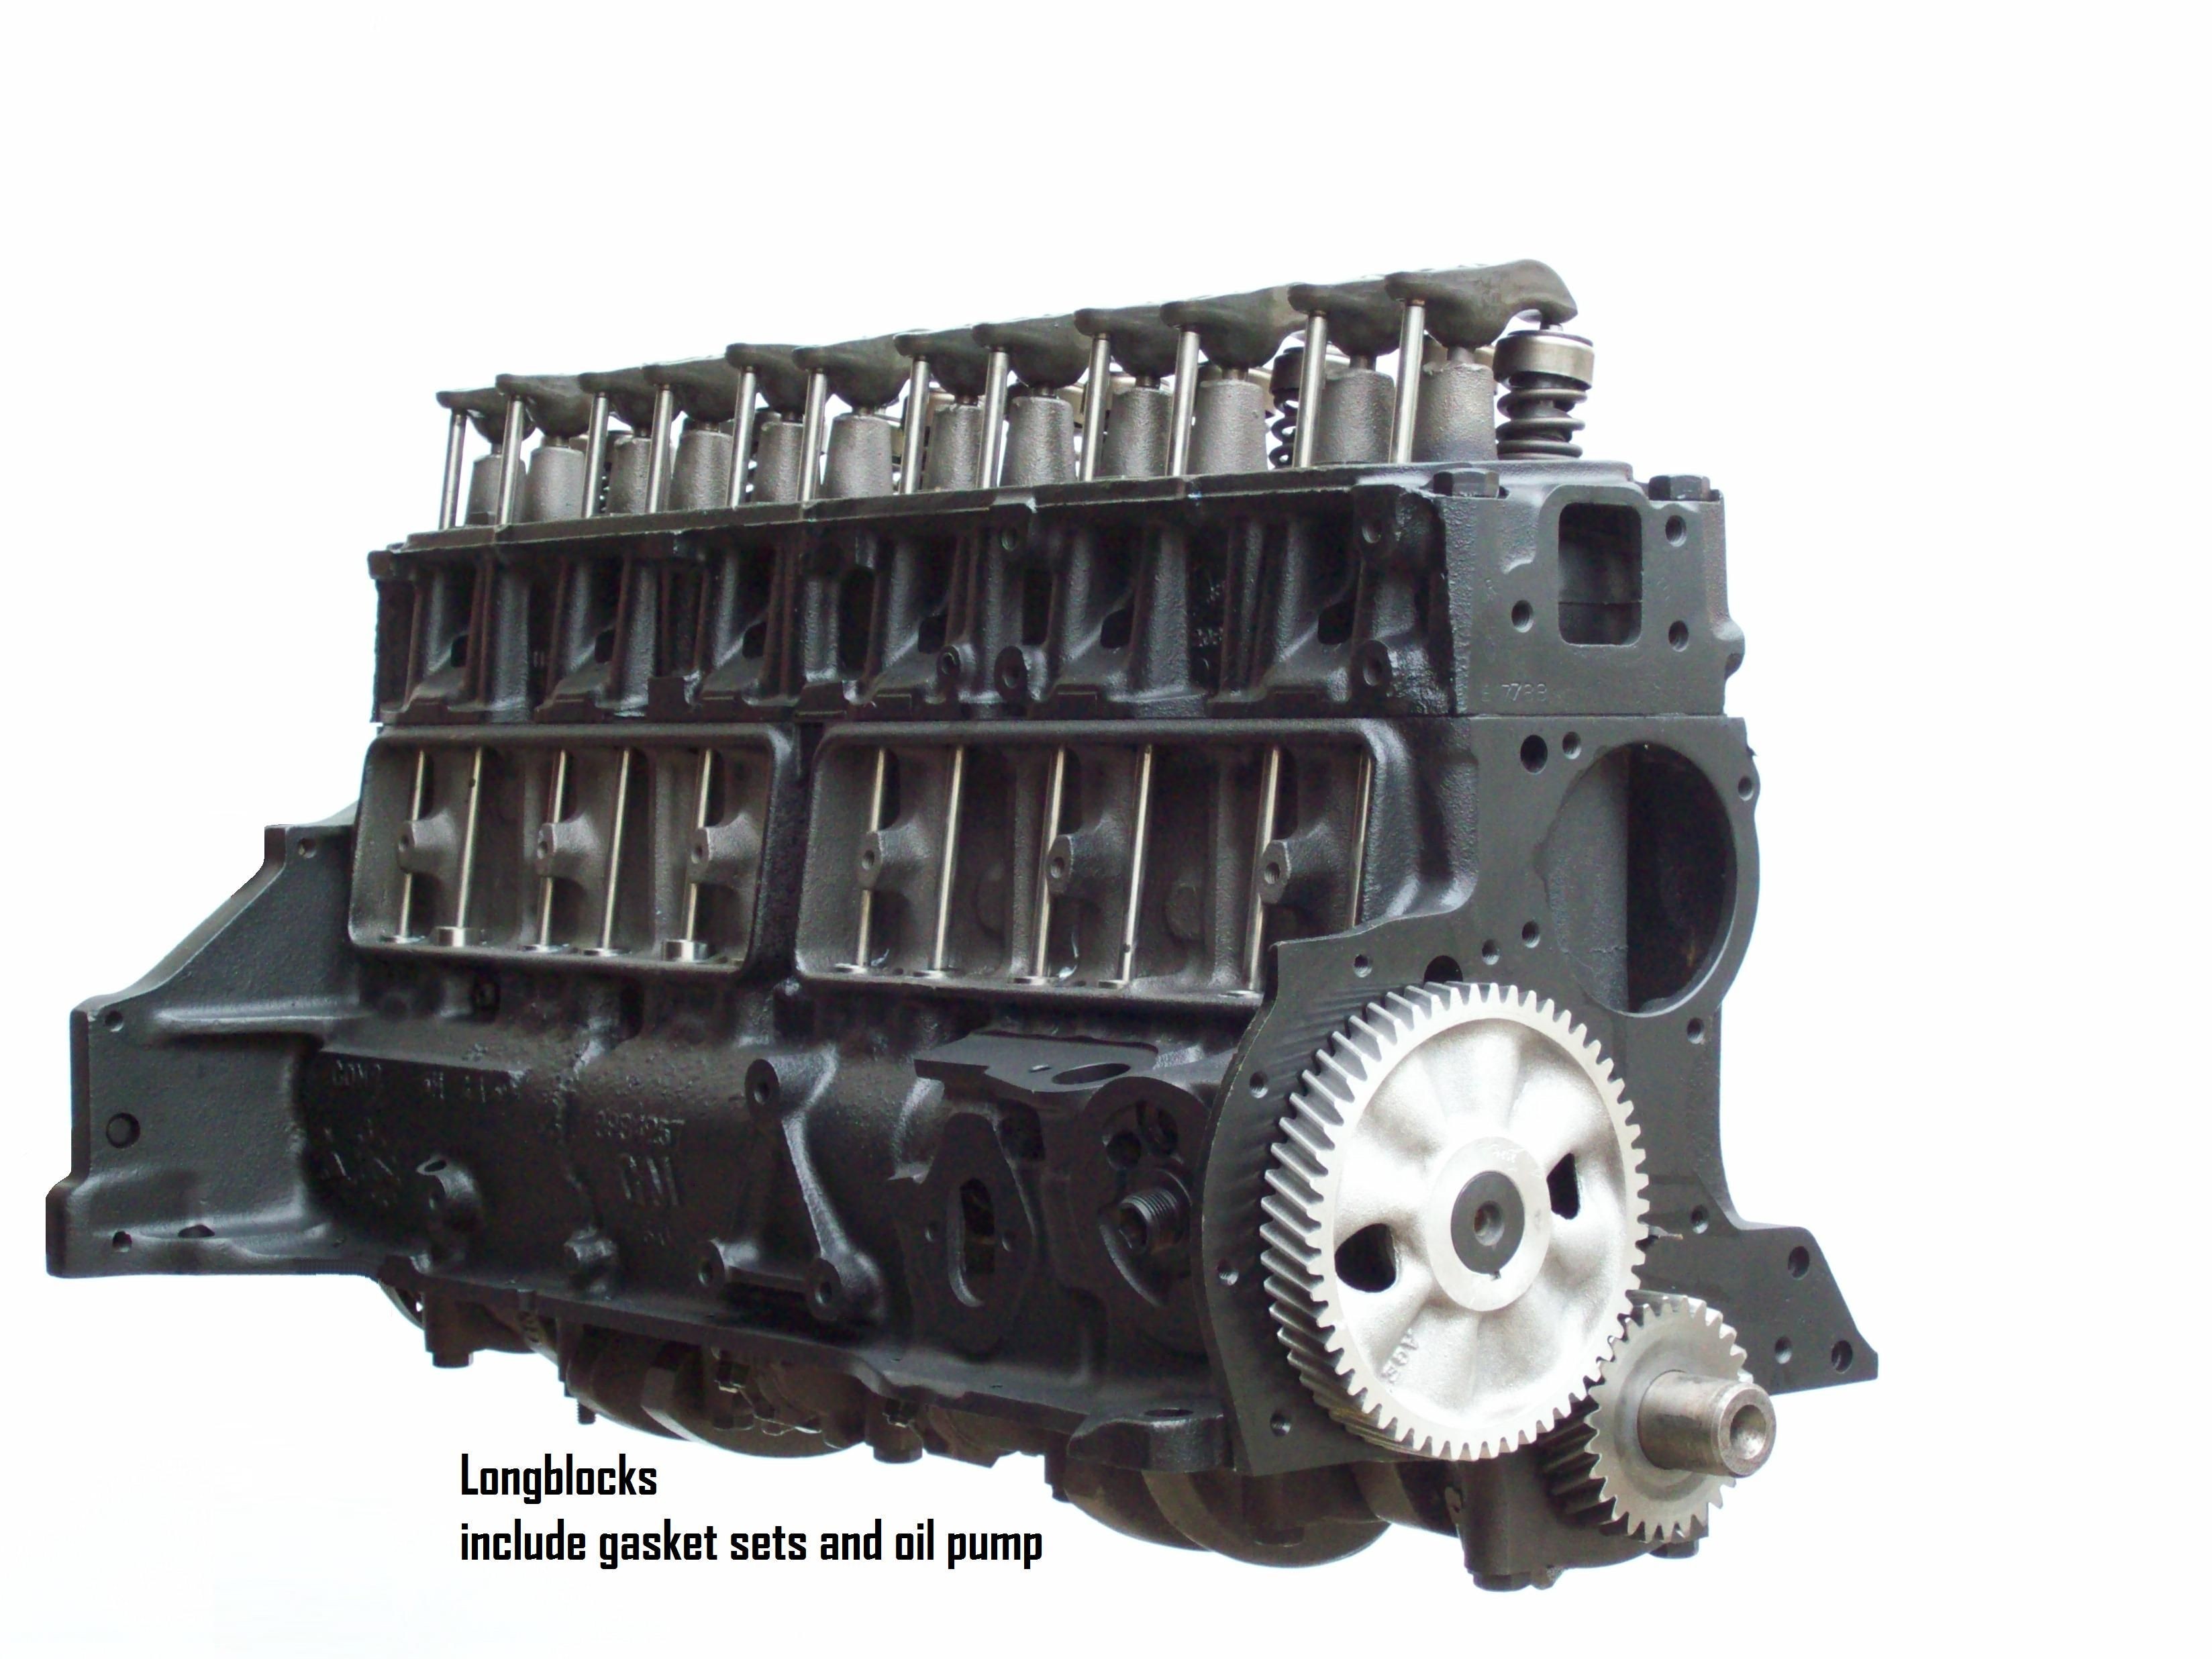 Straight Six Engine Diagram Best Warranty On New Base Engines &amp; Remanufactured Engines for